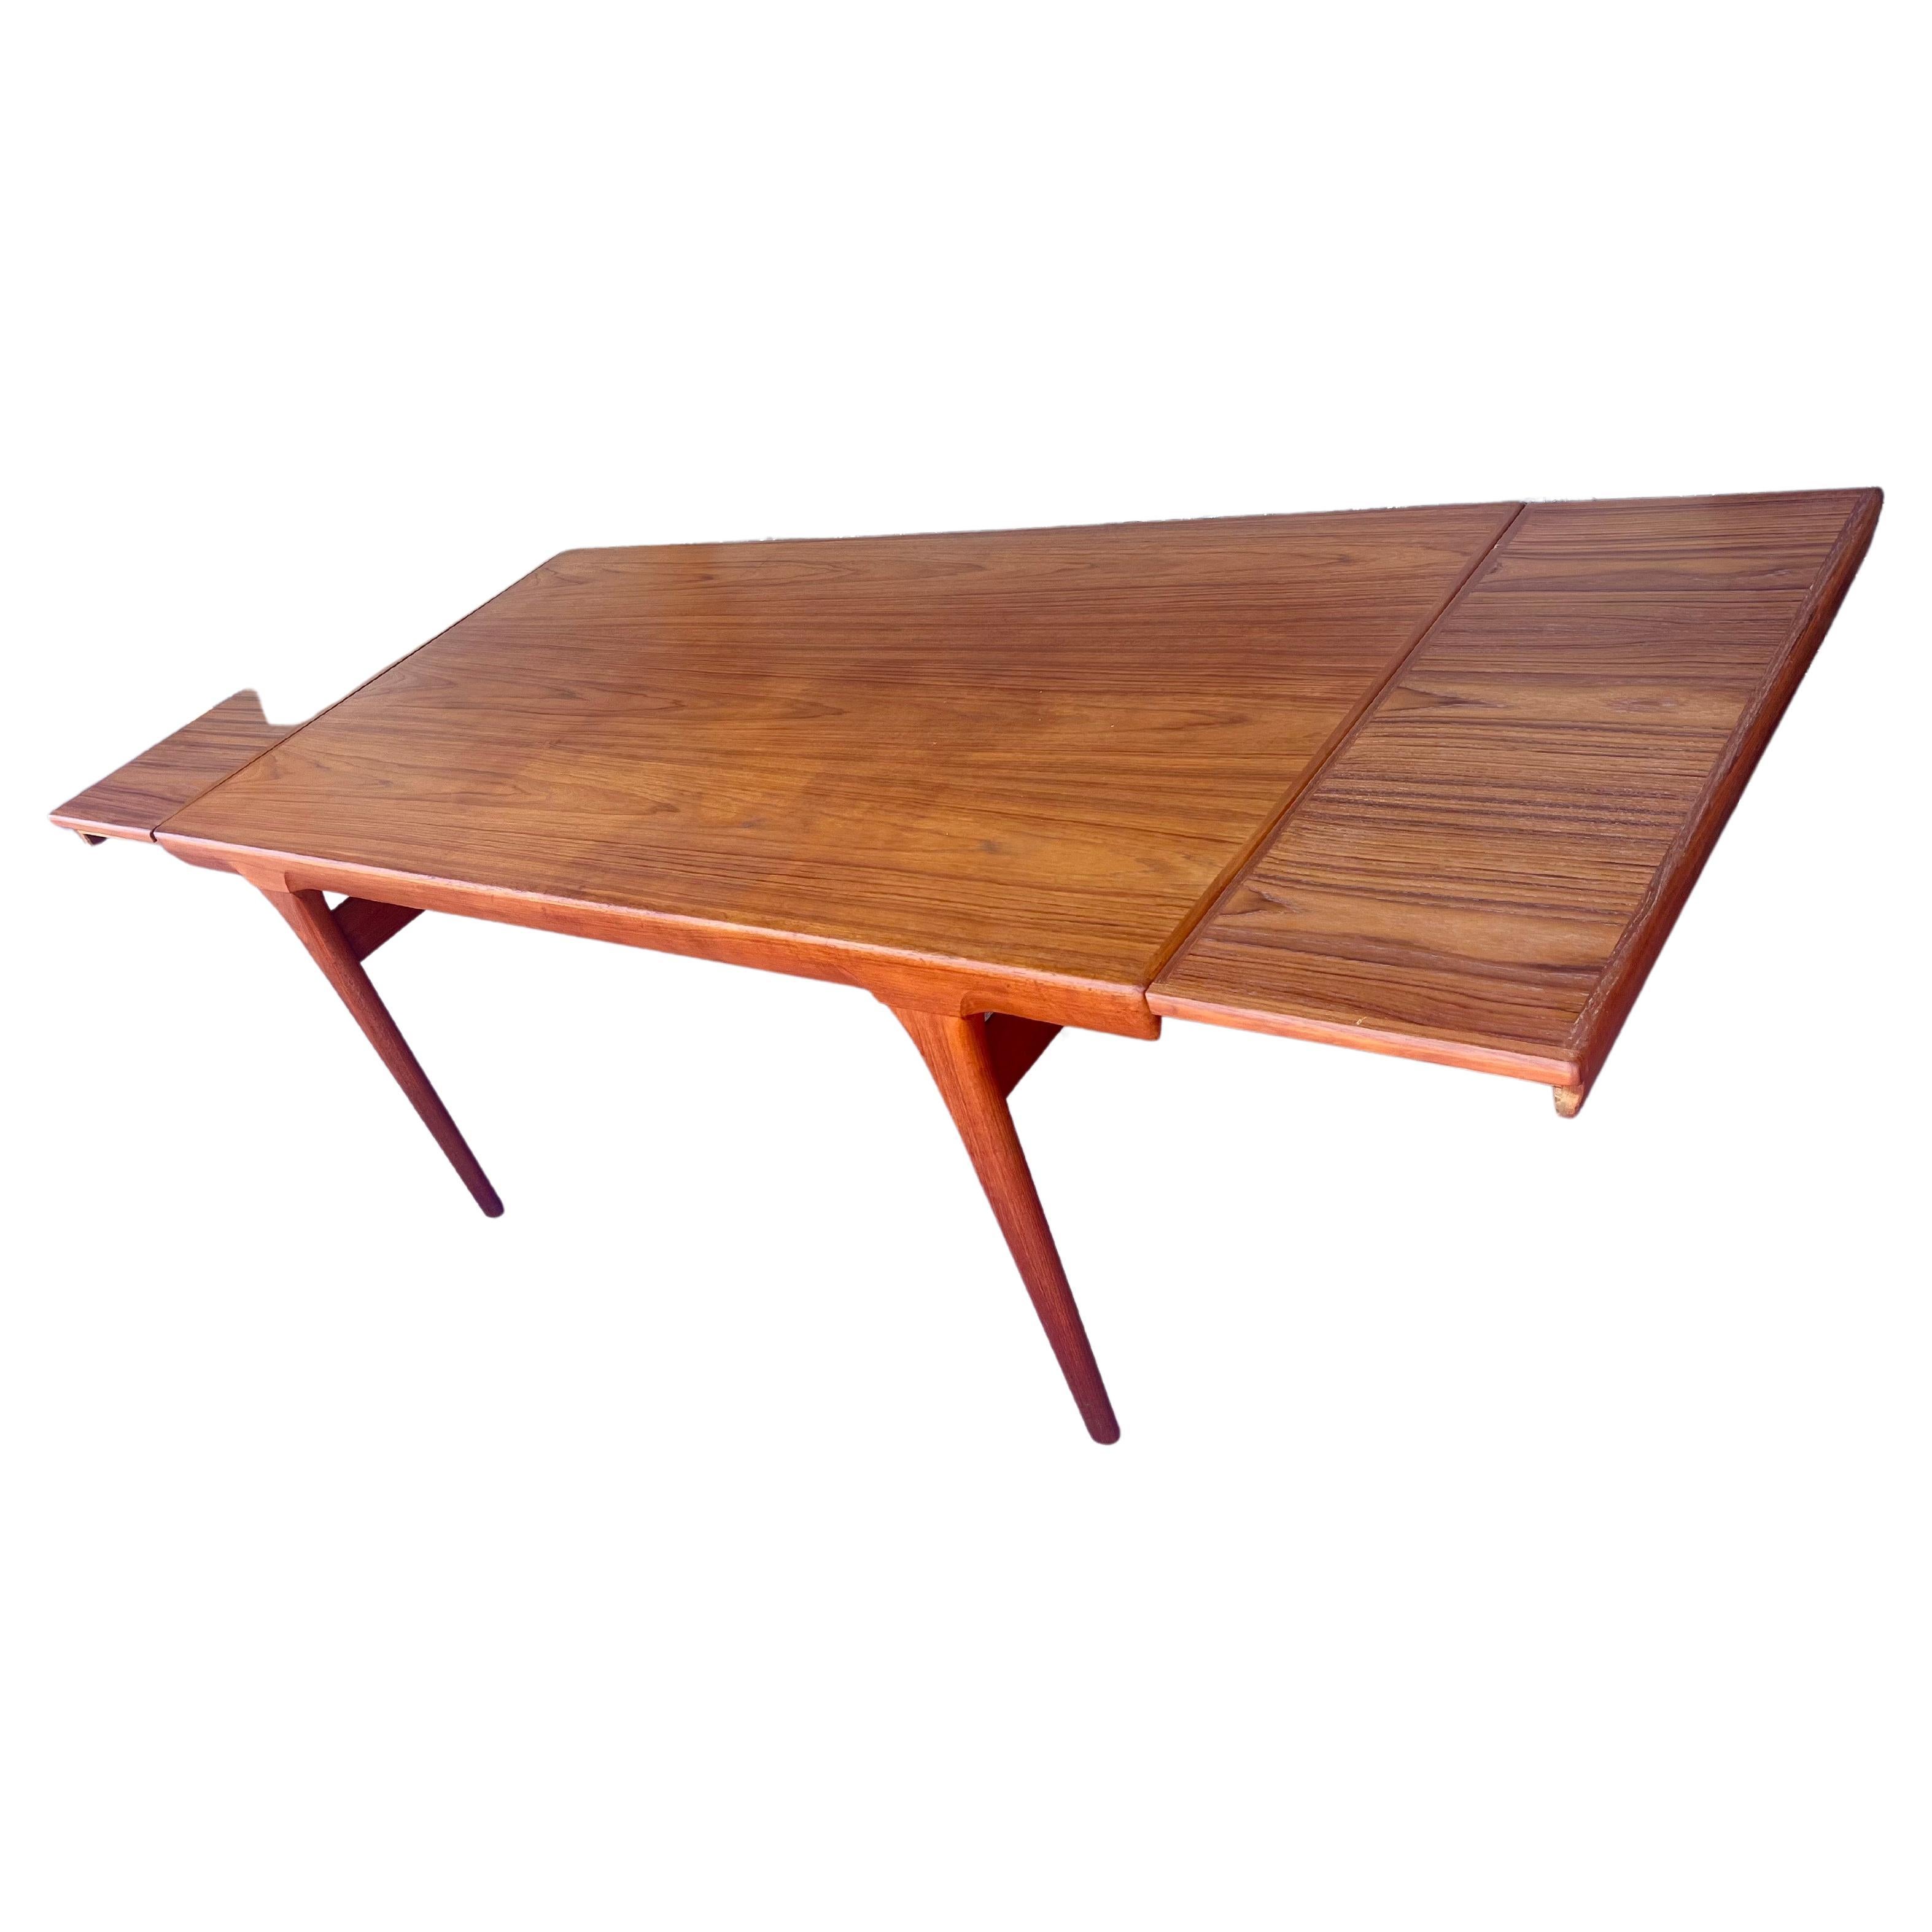 Beautiful Danish modern teak with double leaves that hide under the table top , each side pulls out and the table sits on the top and close , this piece its in great condition the table its 68' long without extensions and 96